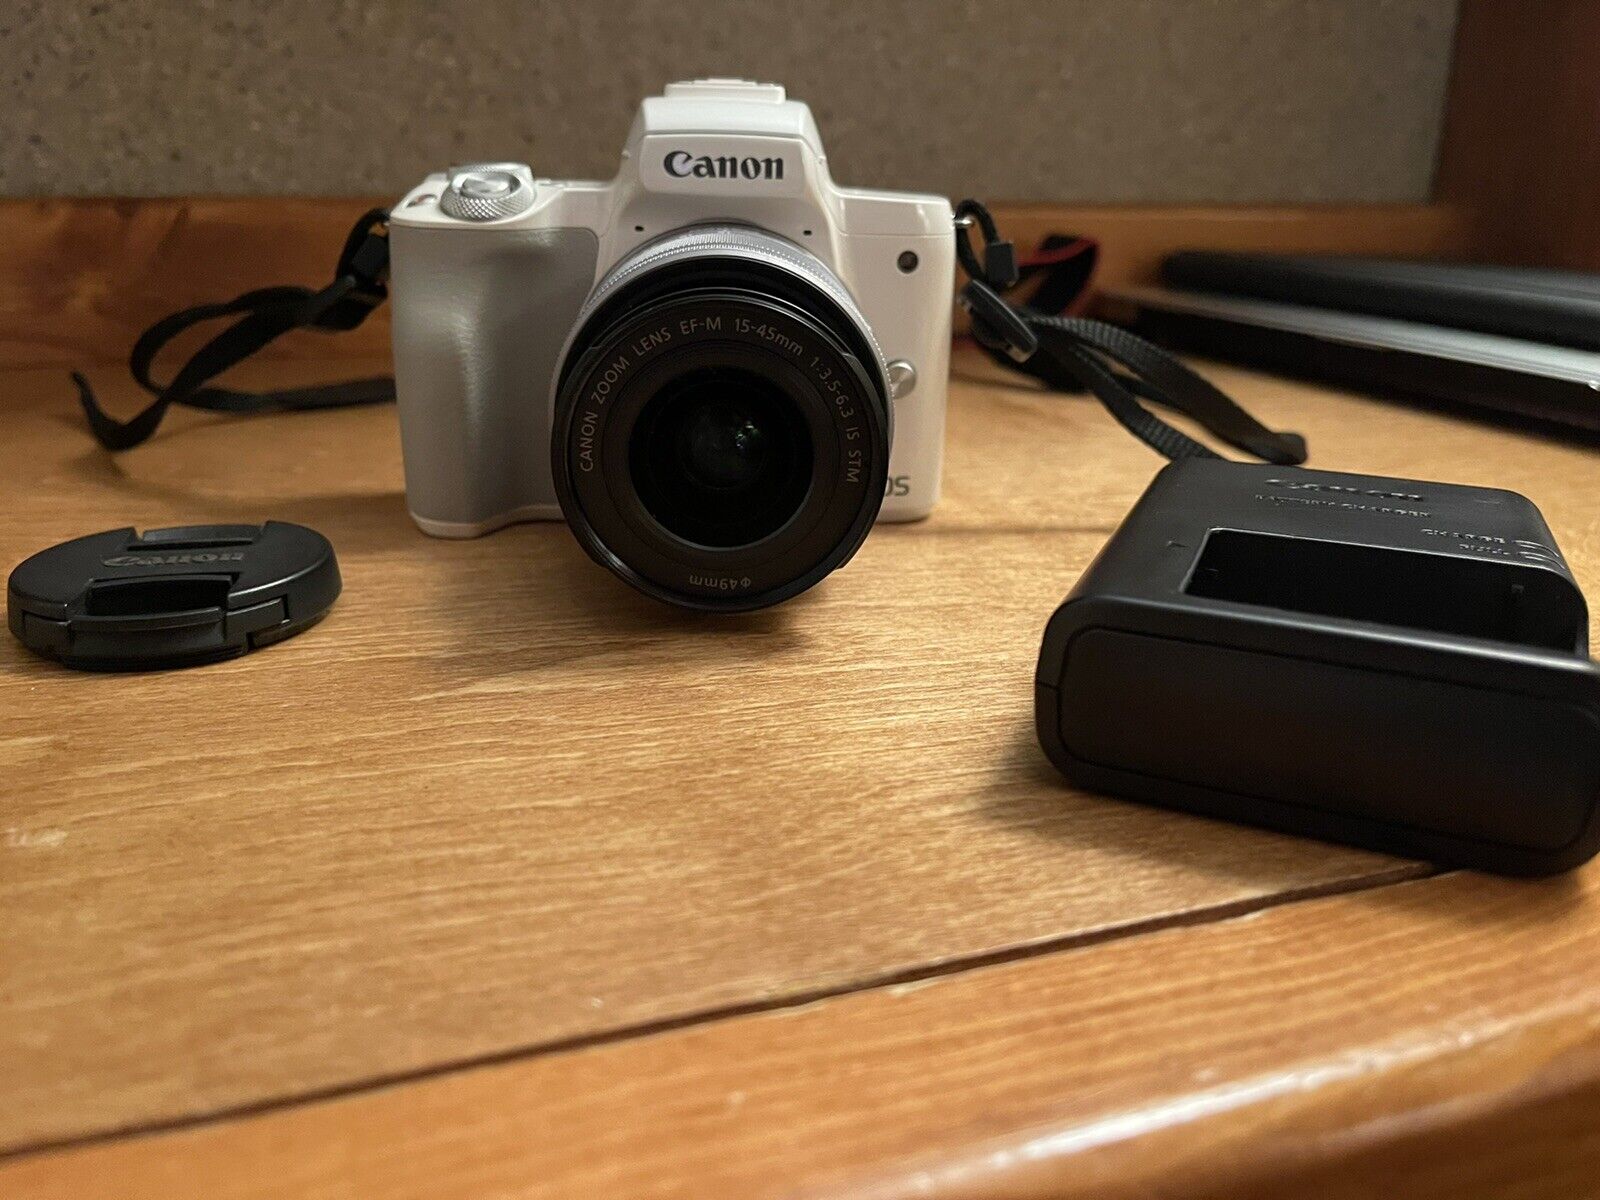 Canon EOS M50 24.1MP Mirrorless Digital Camera with 15-45mm STM Lens - White